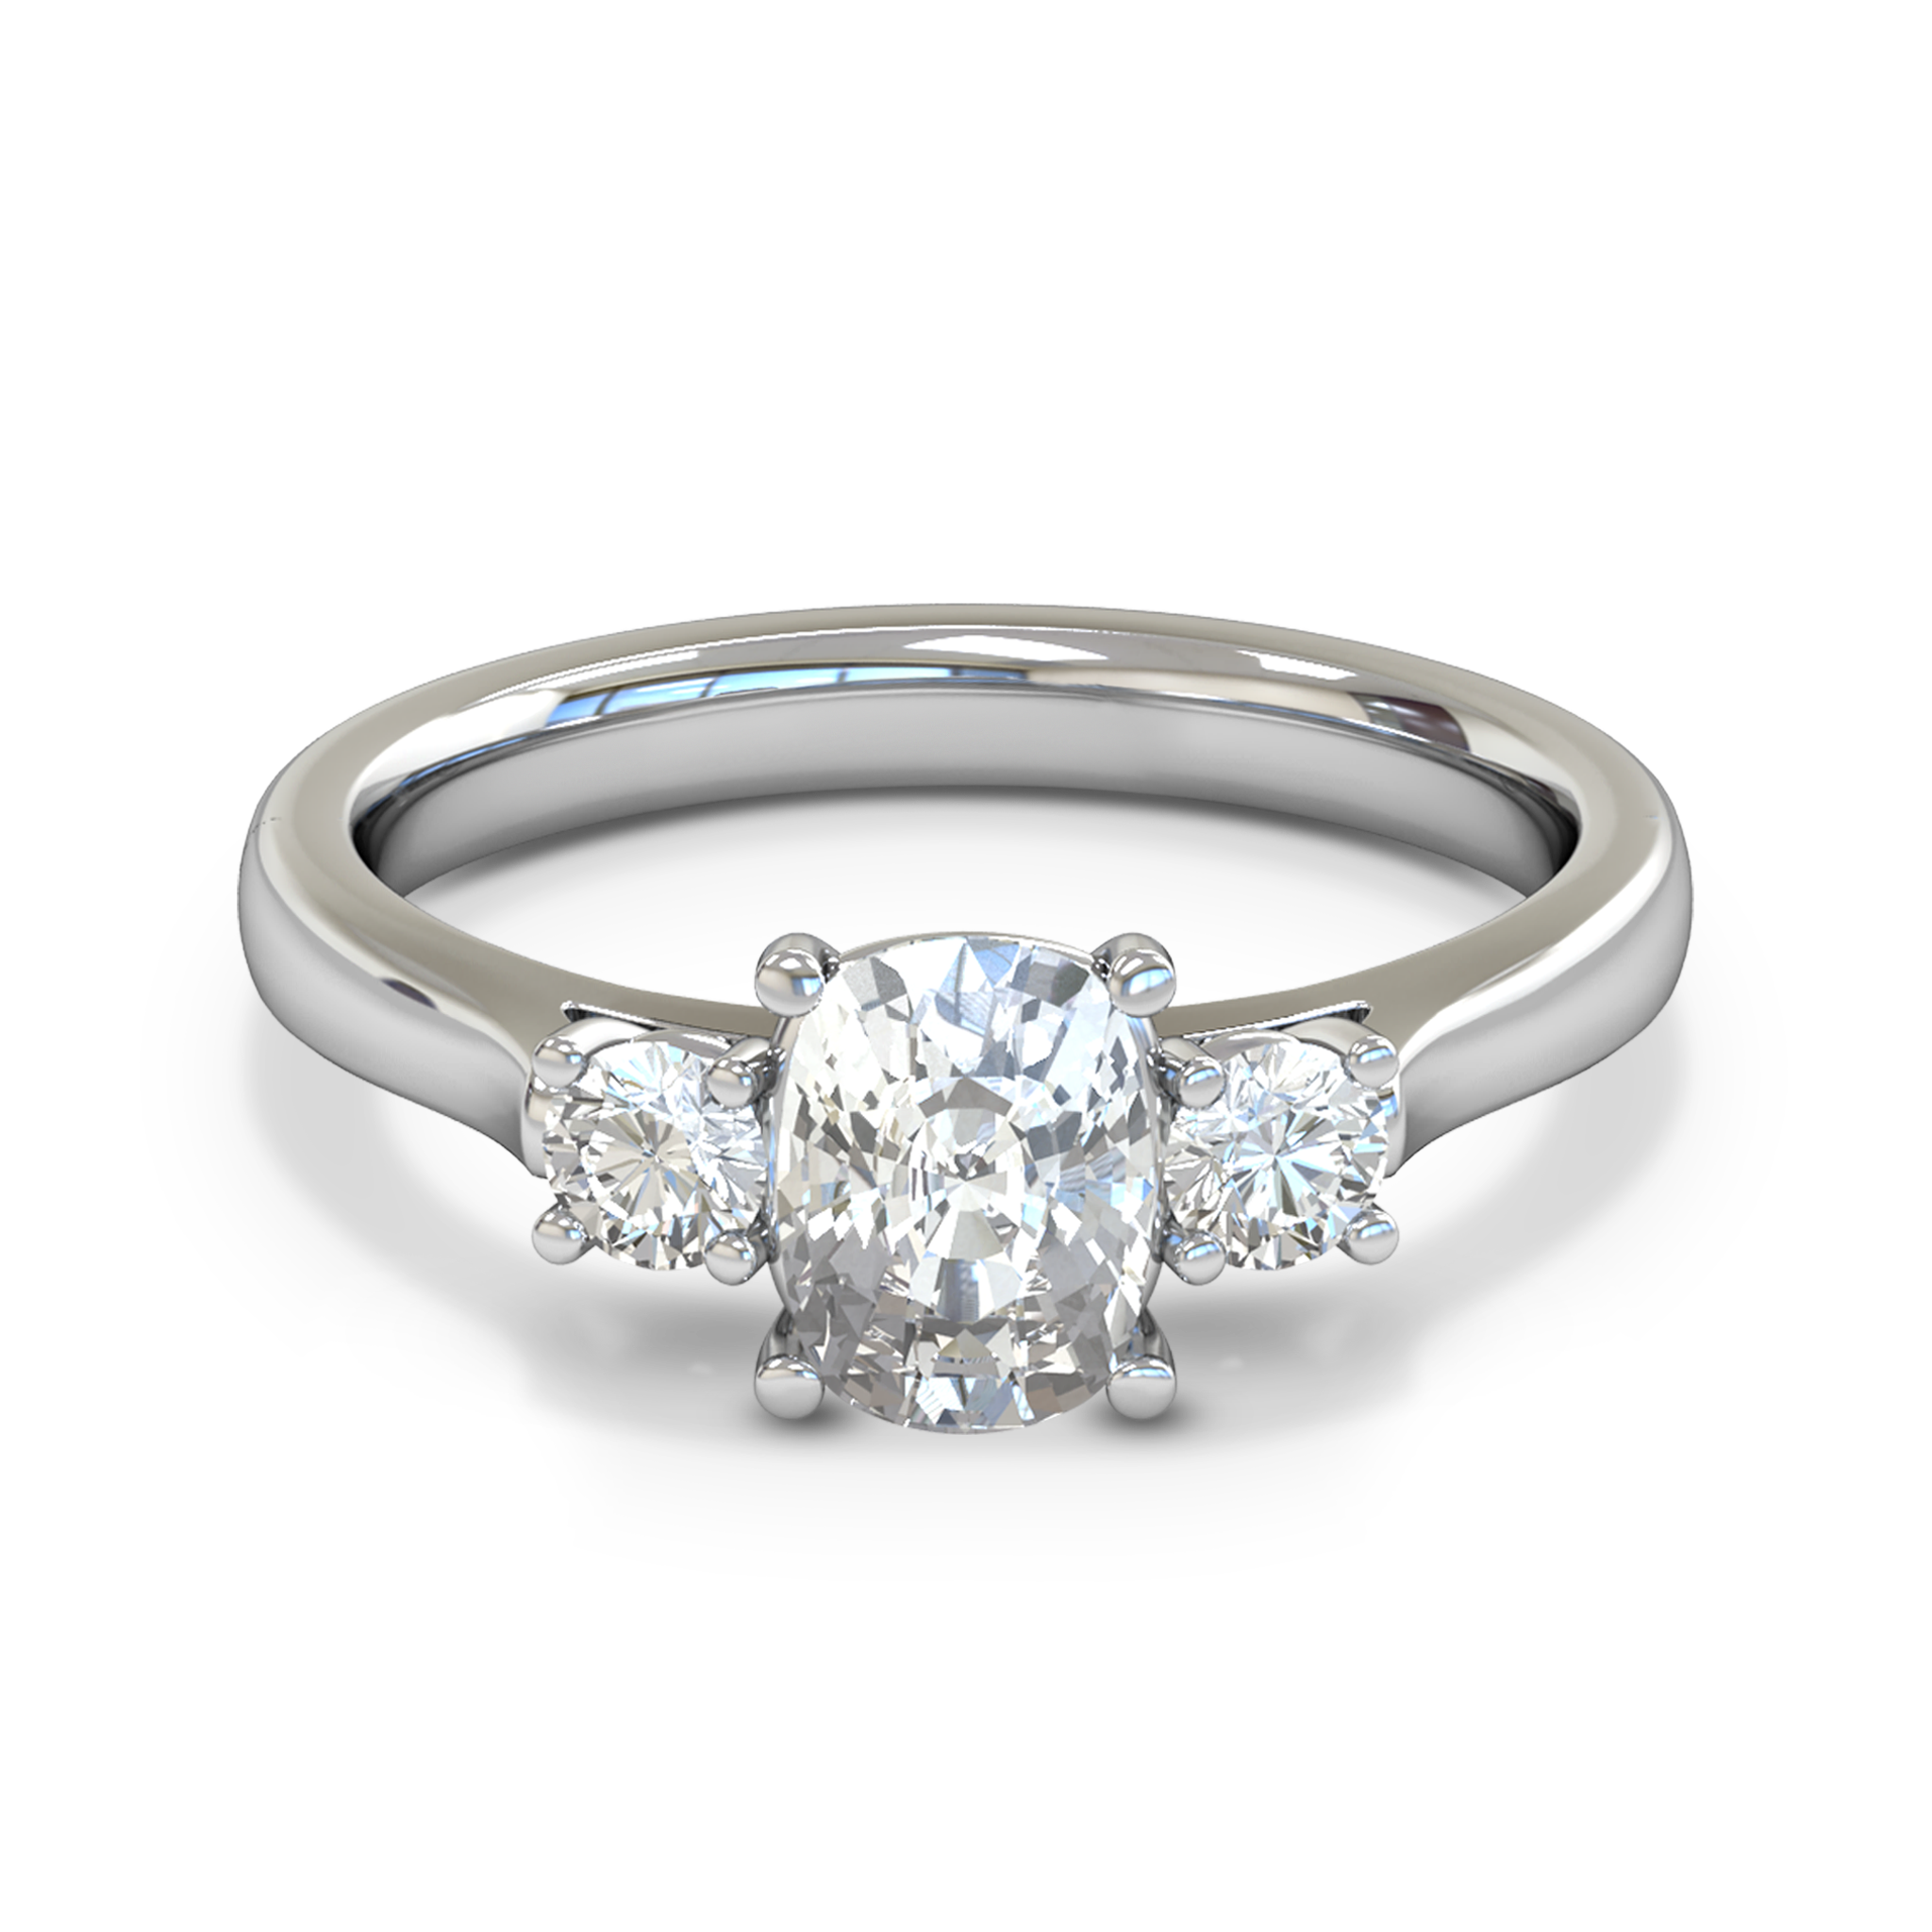 Trilogy Cushion Cut Diamond Fairtrade Gold Engagement Ring in 18K White Fairtrade Gold